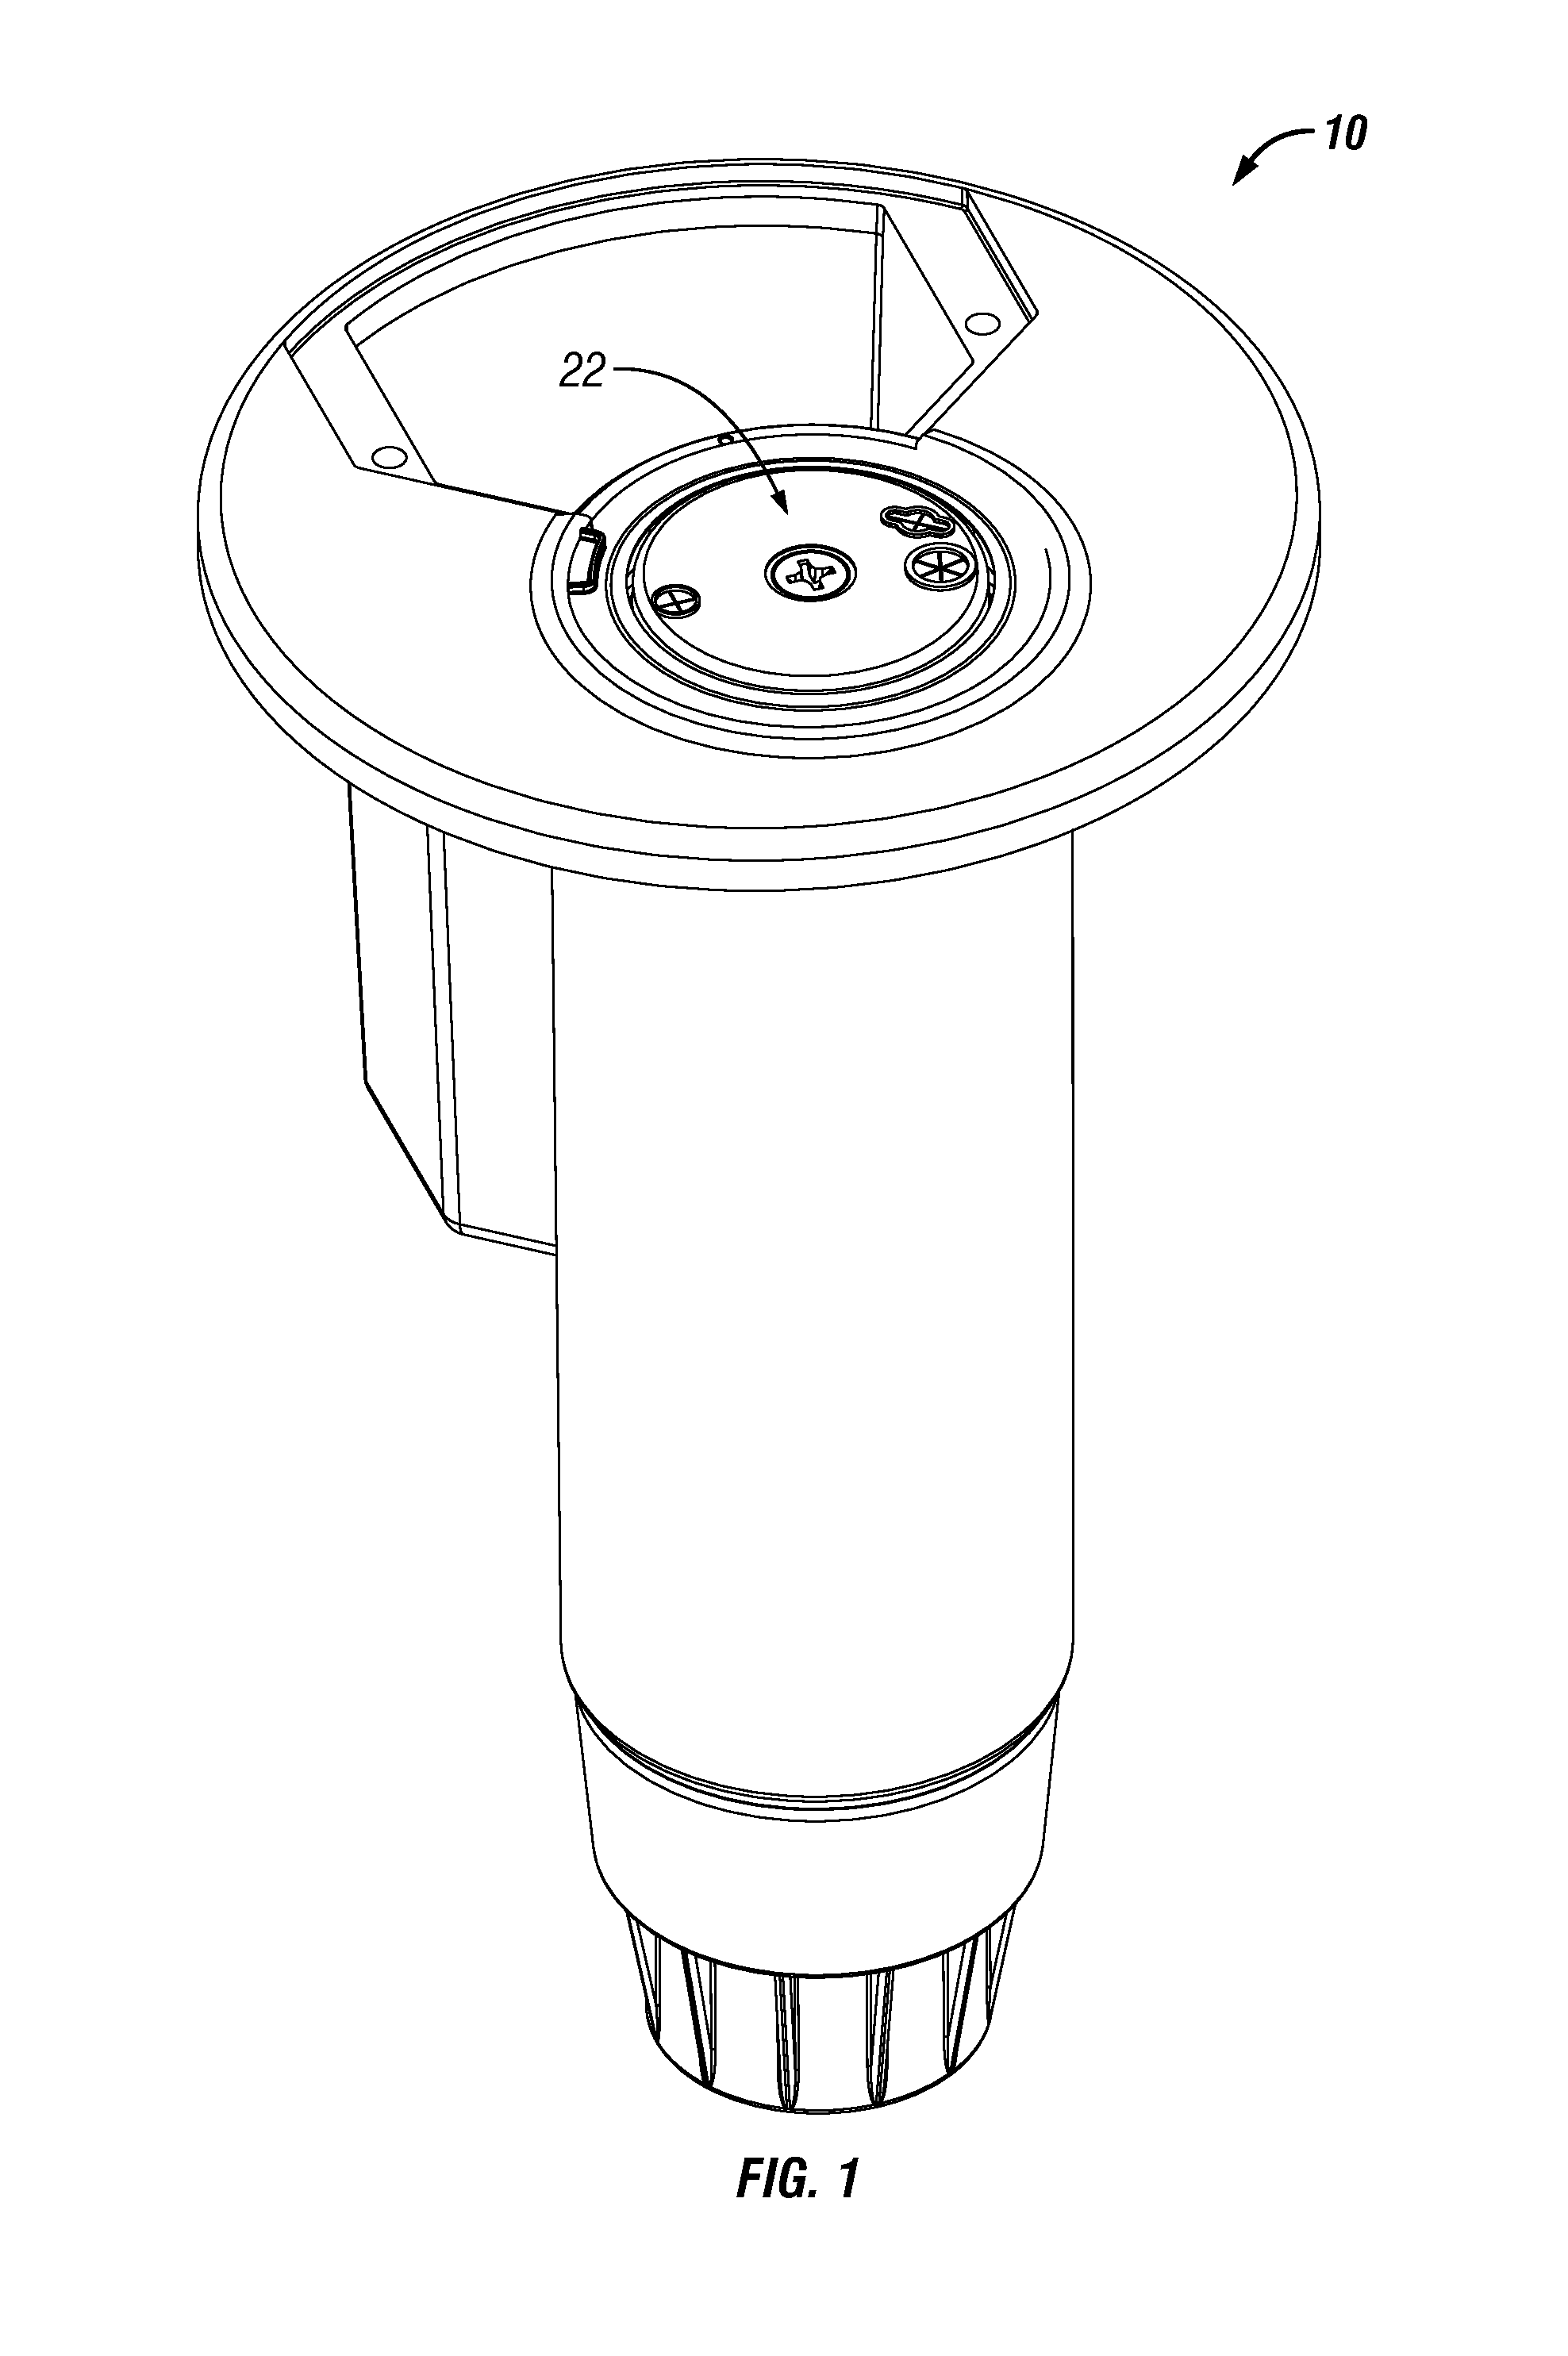 Dual Trajectory Nozzle for Rotor-Type Sprinkler